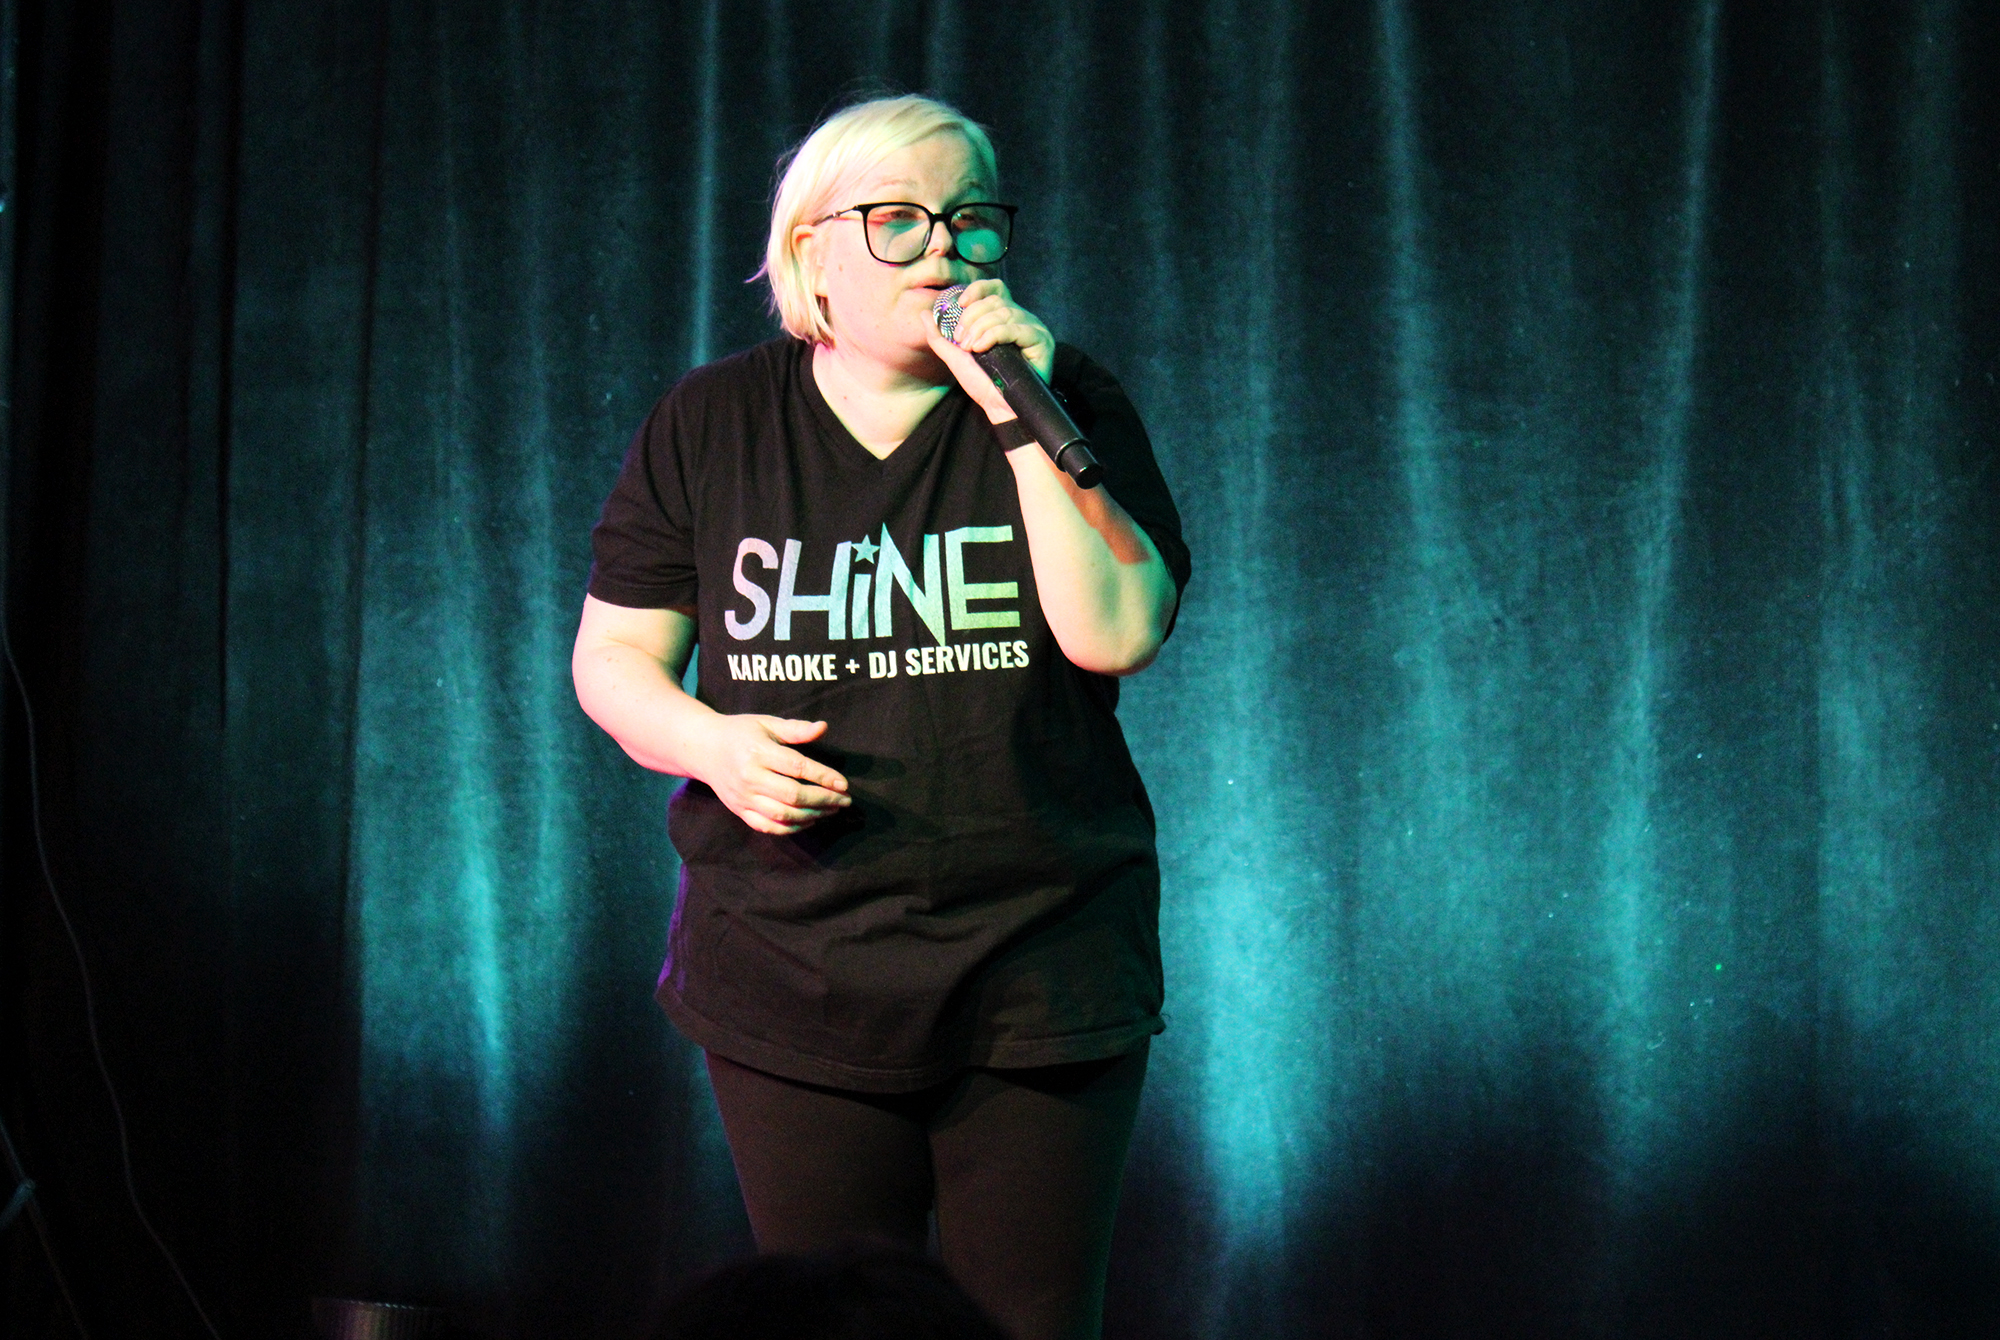 Christina Mackey, SHINE Karaoke owner, warms up the audience with some Tones and I.